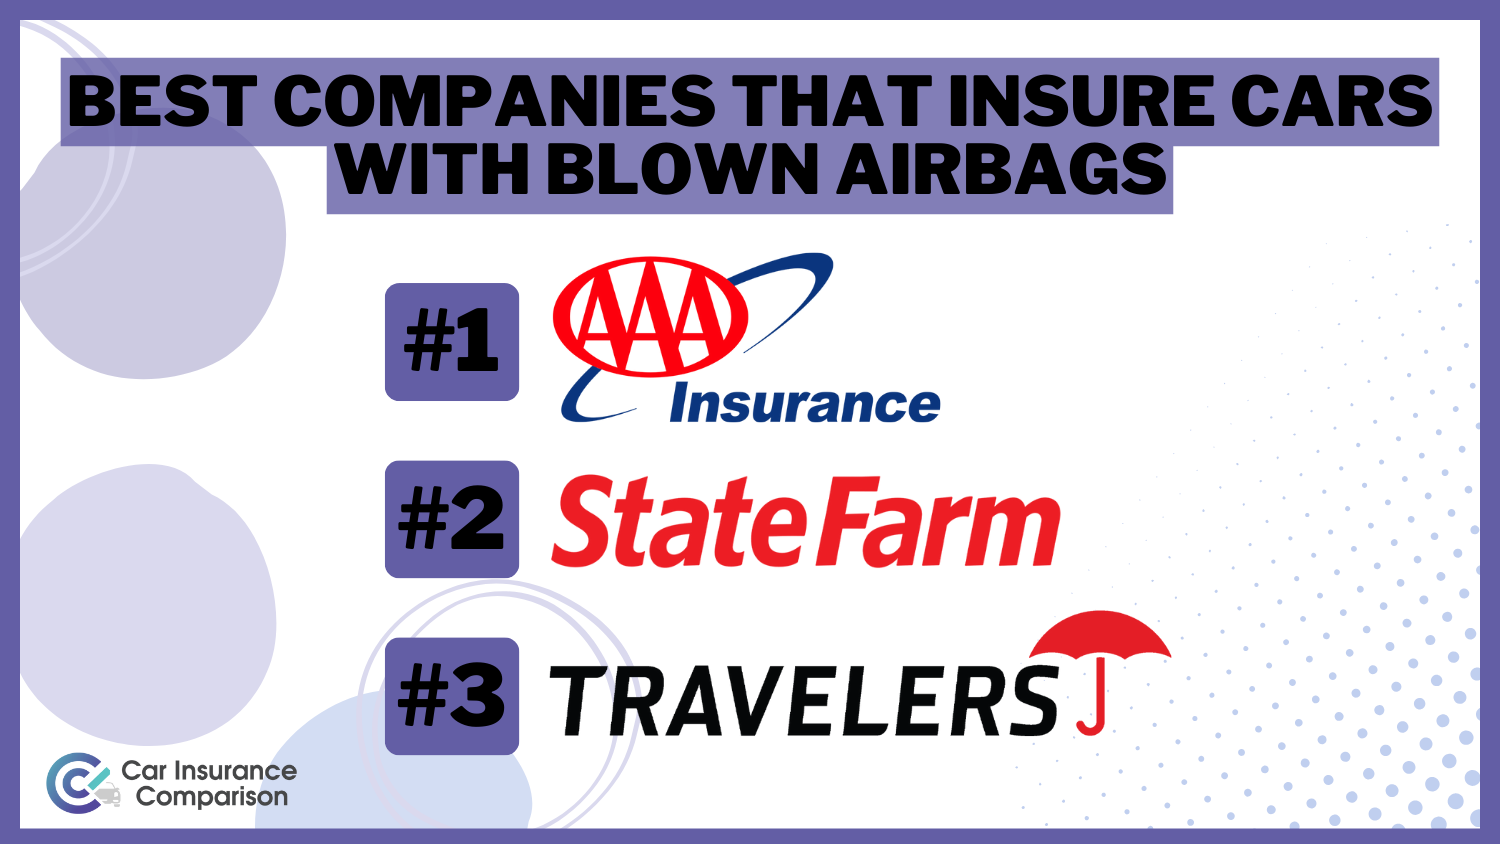 Best Companies That Insure Cars With Blown Airbags: AAA, State Farm, and Travelers